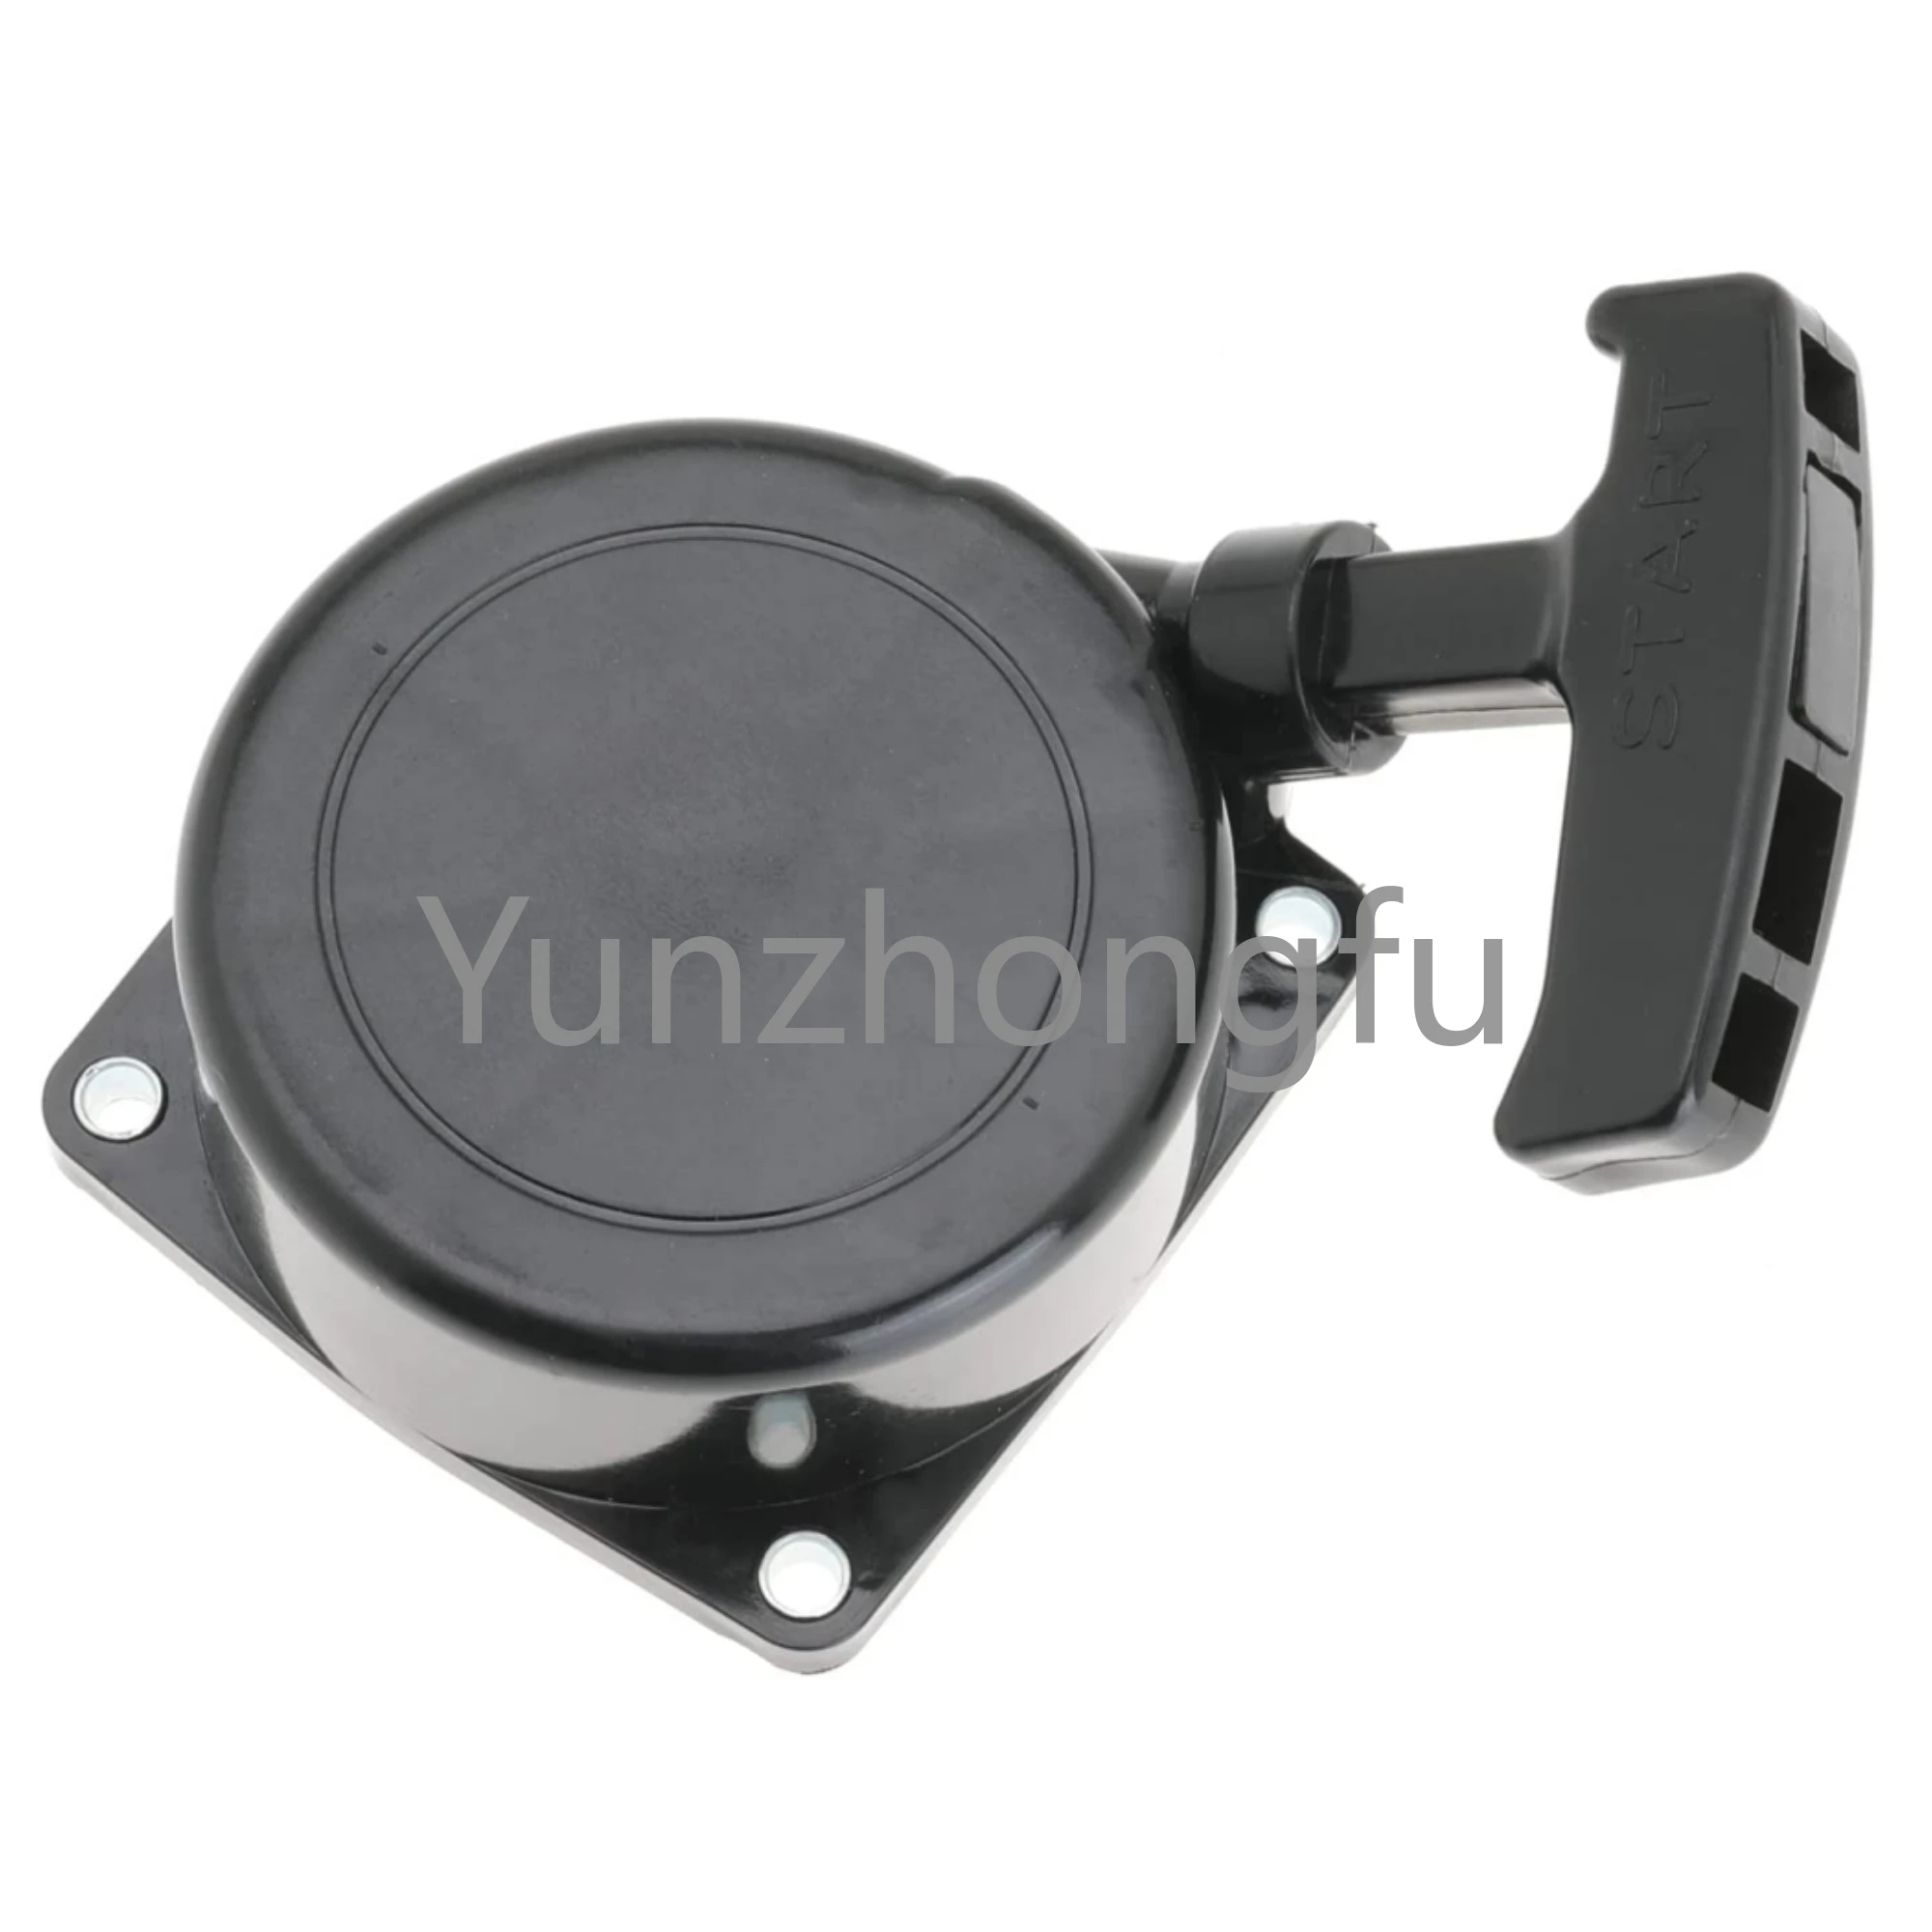 

Recoil Starter Assembly Fit for Echo Shindaiwa PB-580T EB600RT PB-580H Replace A050000340